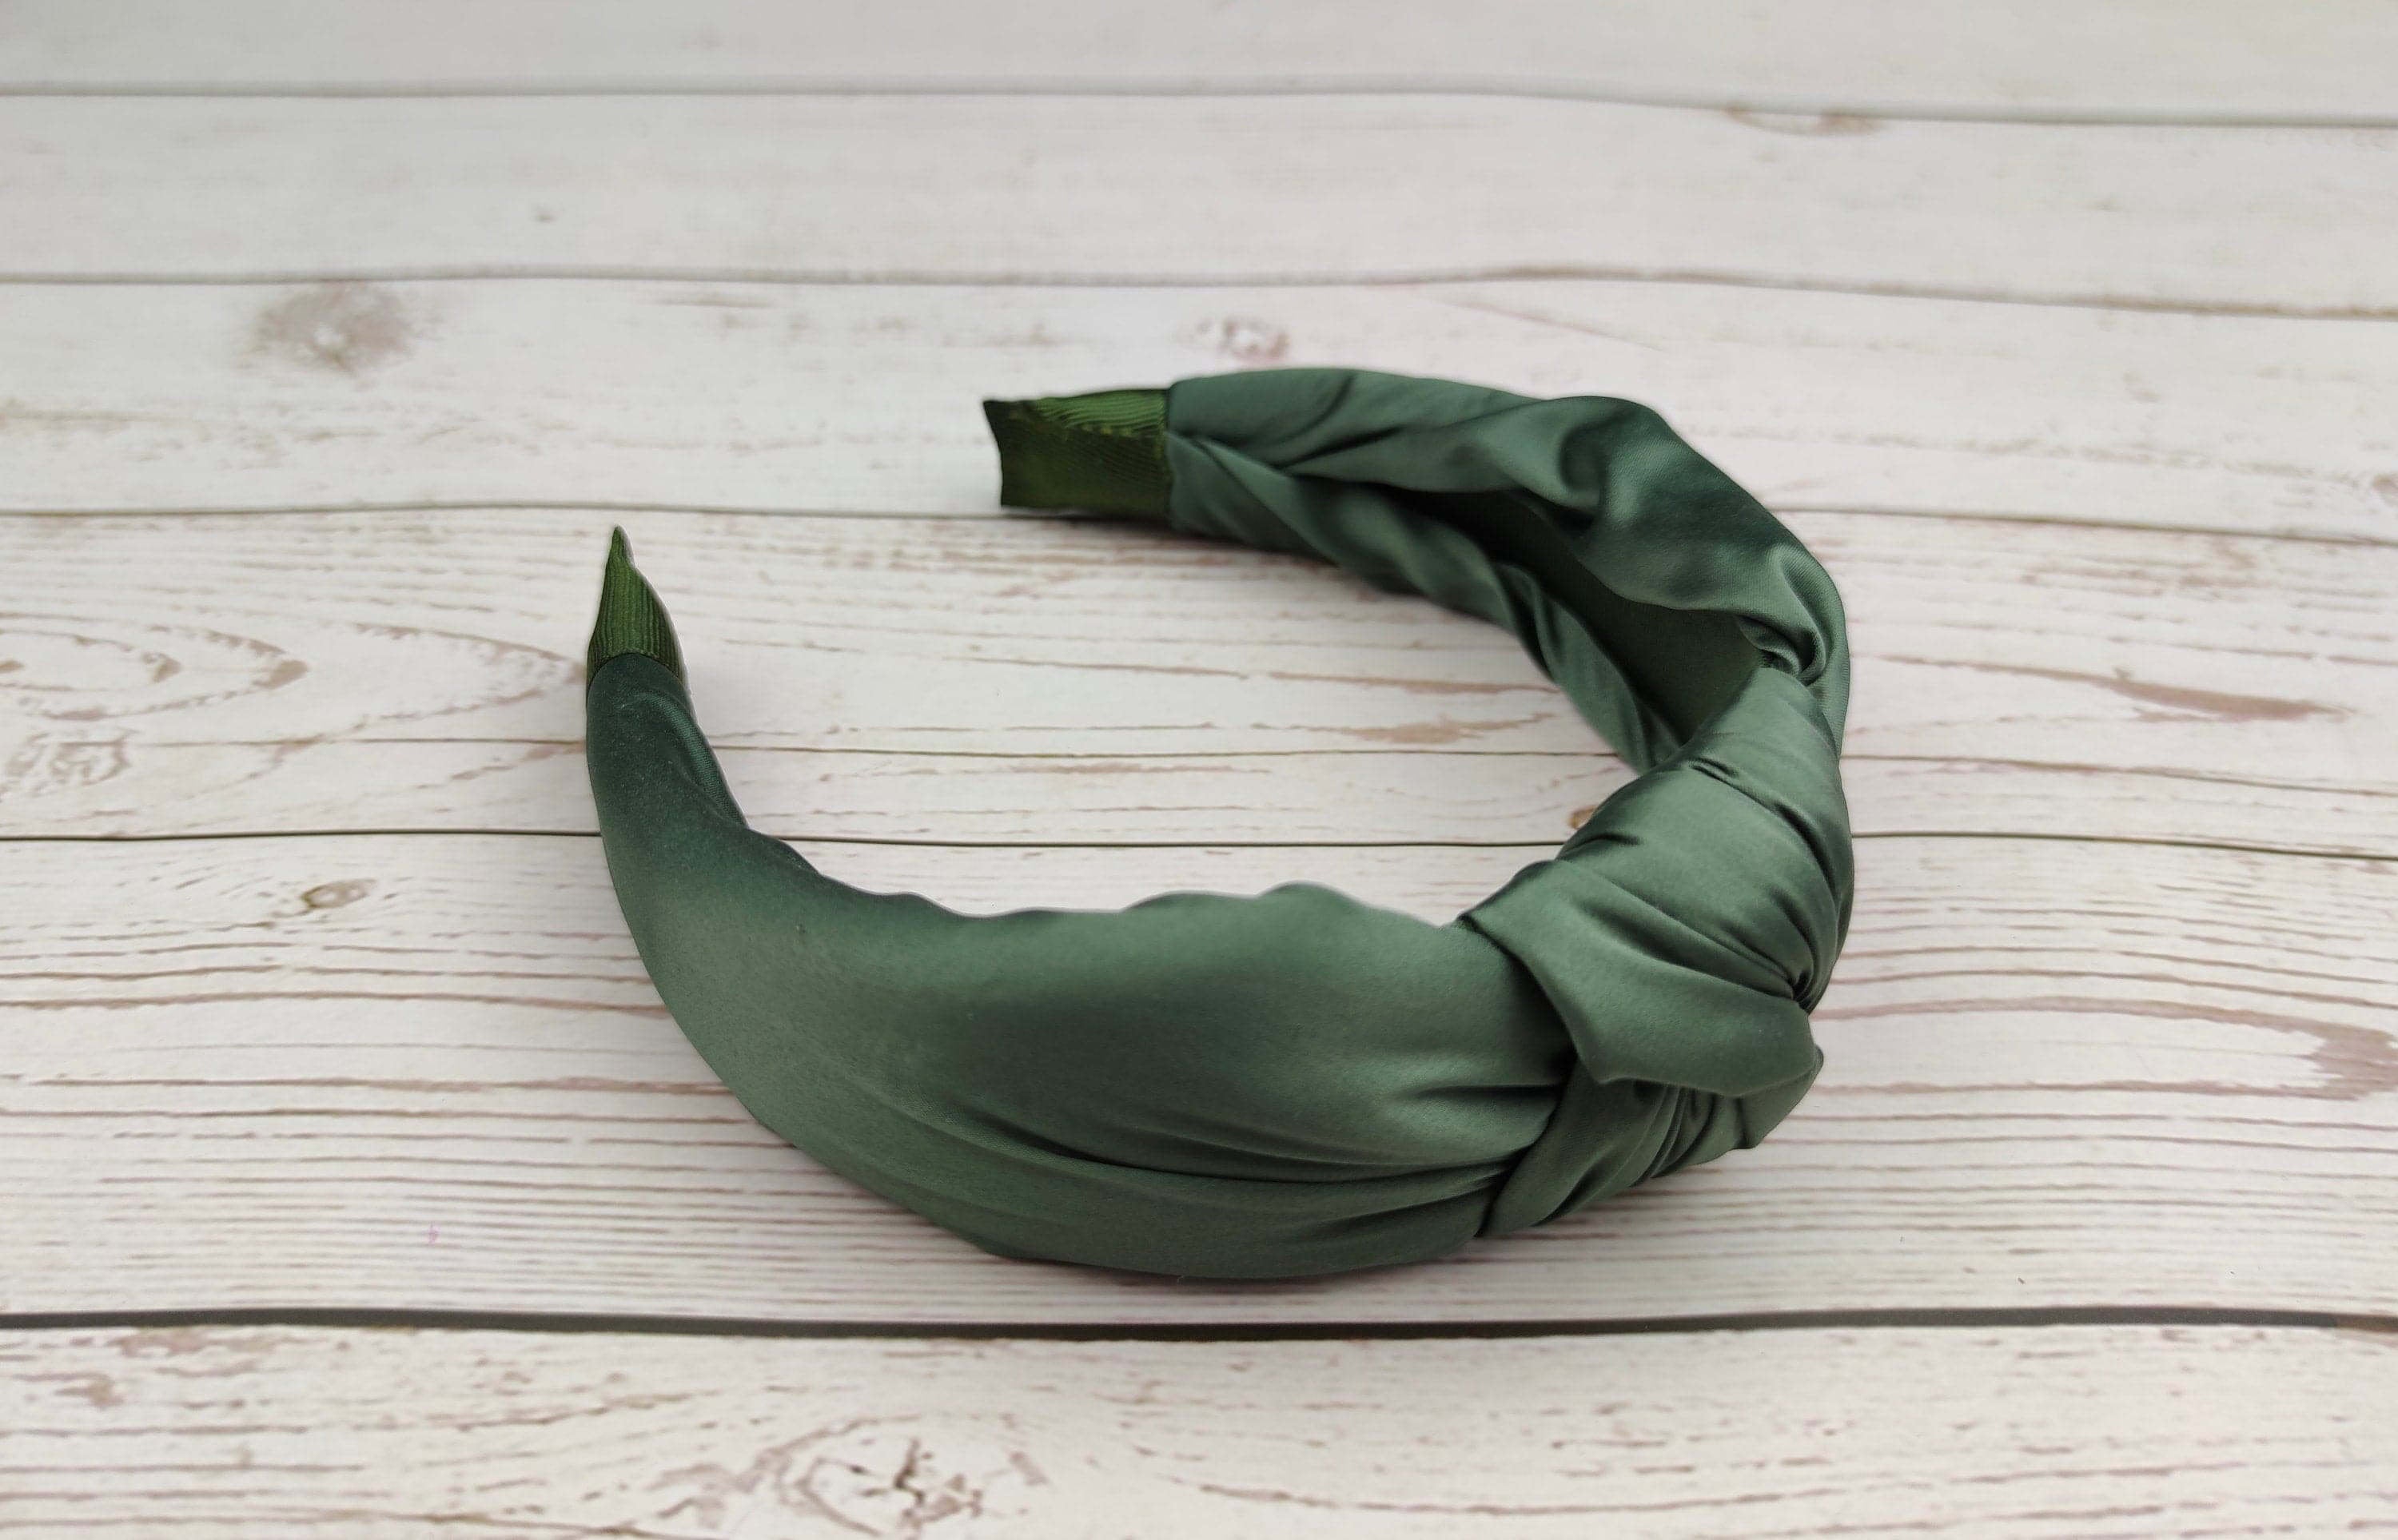 Get fashionable this season with this stylish Light Green color padded satin headband! This headband is made of soft and comfortable satin fabric and is decorated with a delicate embroidery design.